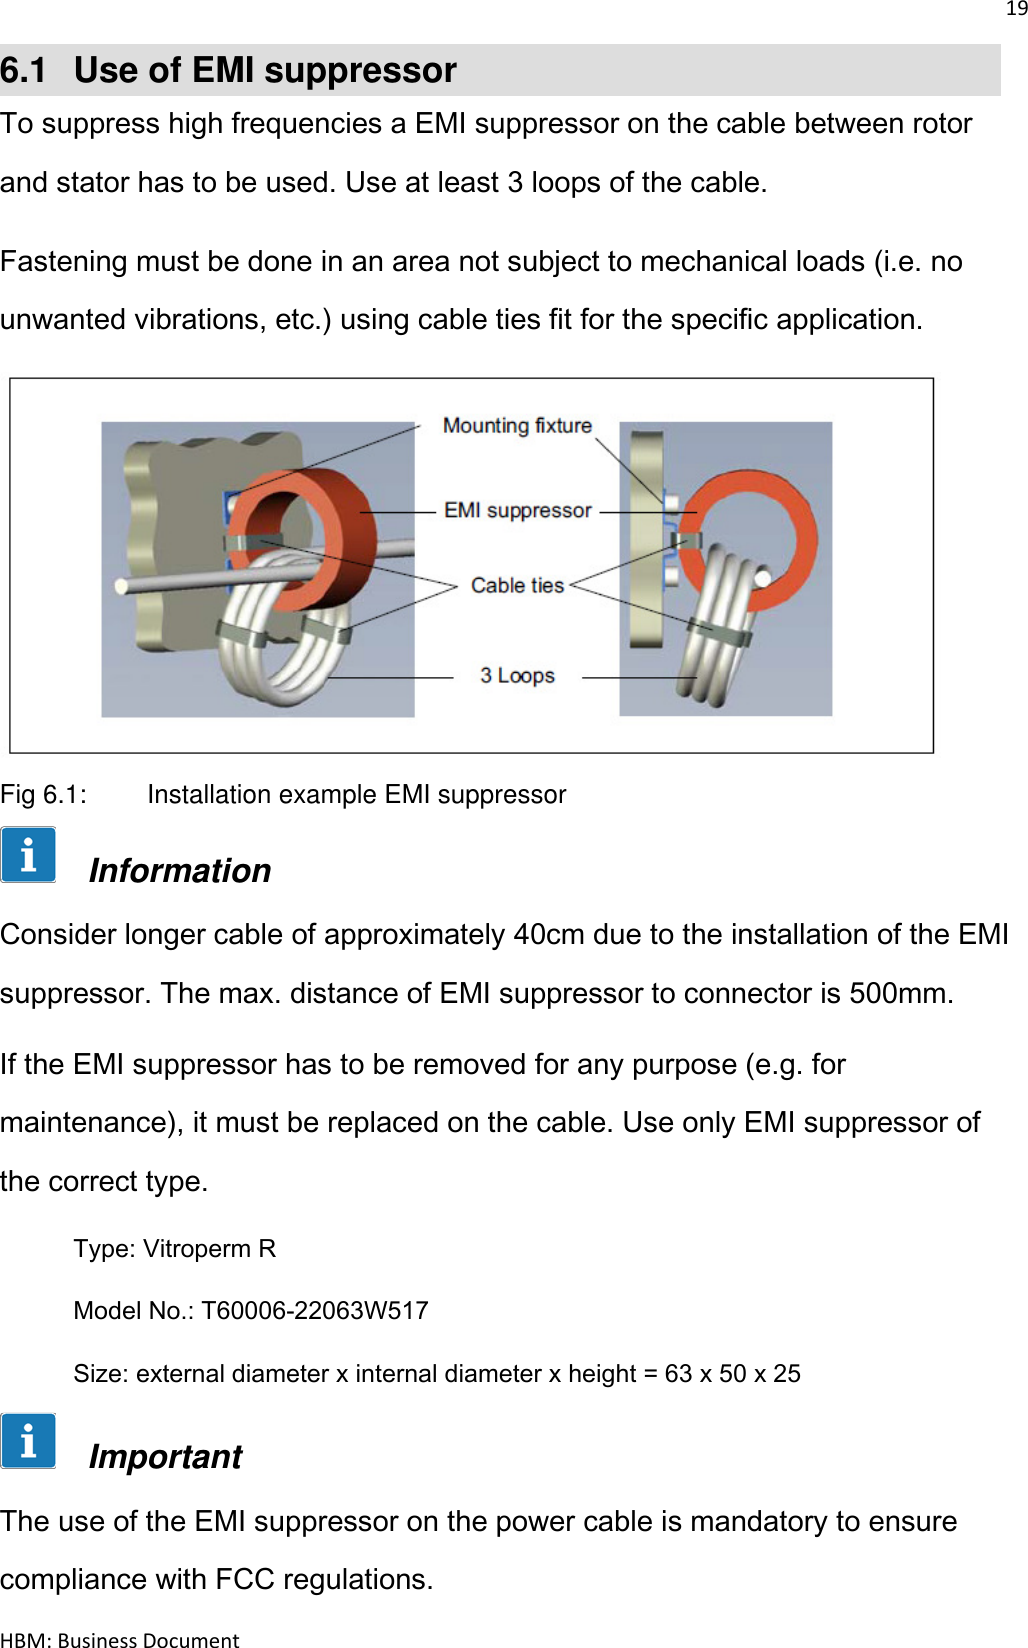 19  HBM: Business Document 6.1  Use of EMI suppressor To suppress high frequencies a EMI suppressor on the cable between rotor and stator has to be used. Use at least 3 loops of the cable. Fastening must be done in an area not subject to mechanical loads (i.e. no unwanted vibrations, etc.) using cable ties fit for the specific application.   Fig 6.1:   Installation example EMI suppressor       Information Consider longer cable of approximately 40cm due to the installation of the EMI suppressor. The max. distance of EMI suppressor to connector is 500mm. If the EMI suppressor has to be removed for any purpose (e.g. for maintenance), it must be replaced on the cable. Use only EMI suppressor of the correct type.  Type: Vitroperm R   Model No.: T60006-22063W517 Size: external diameter x internal diameter x height = 63 x 50 x 25       Important The use of the EMI suppressor on the power cable is mandatory to ensure compliance with FCC regulations. 